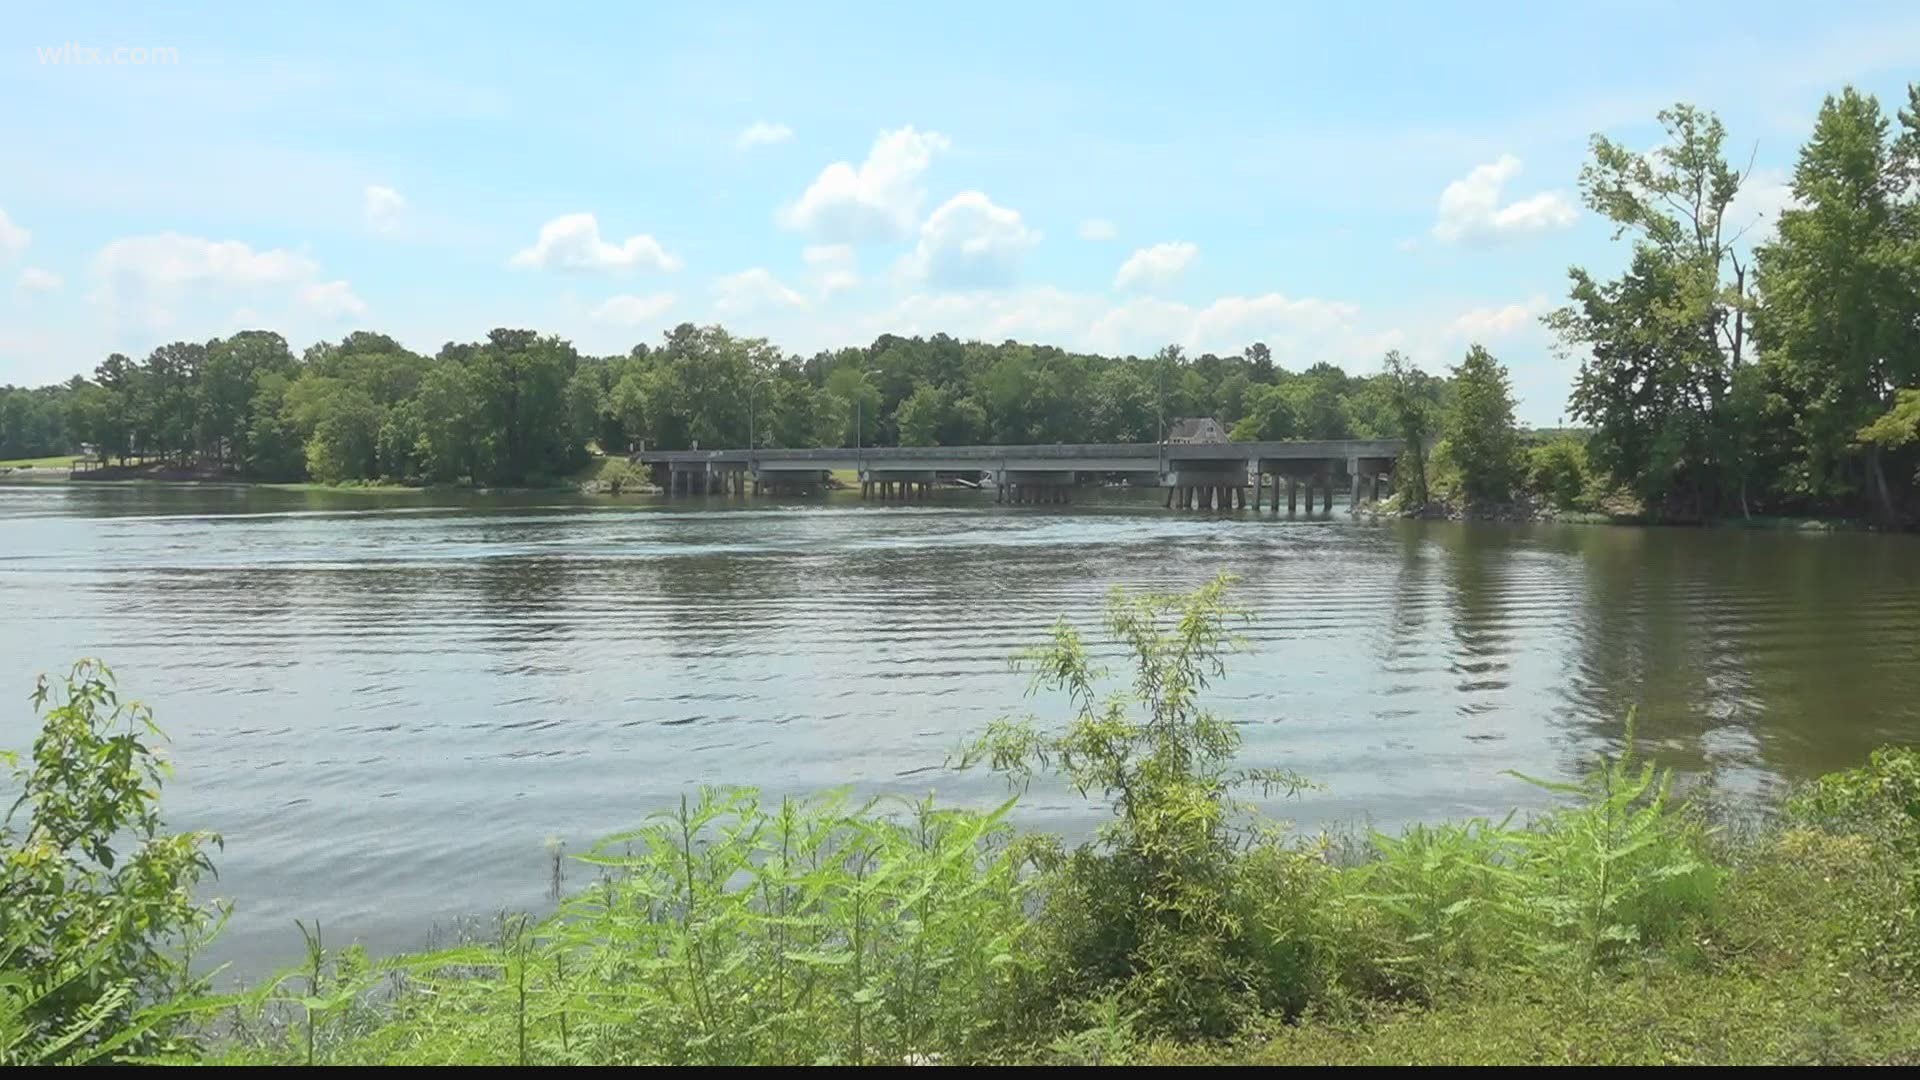 Four people fled the scene after July 4 collision on Lake Wateree in Fairfield County